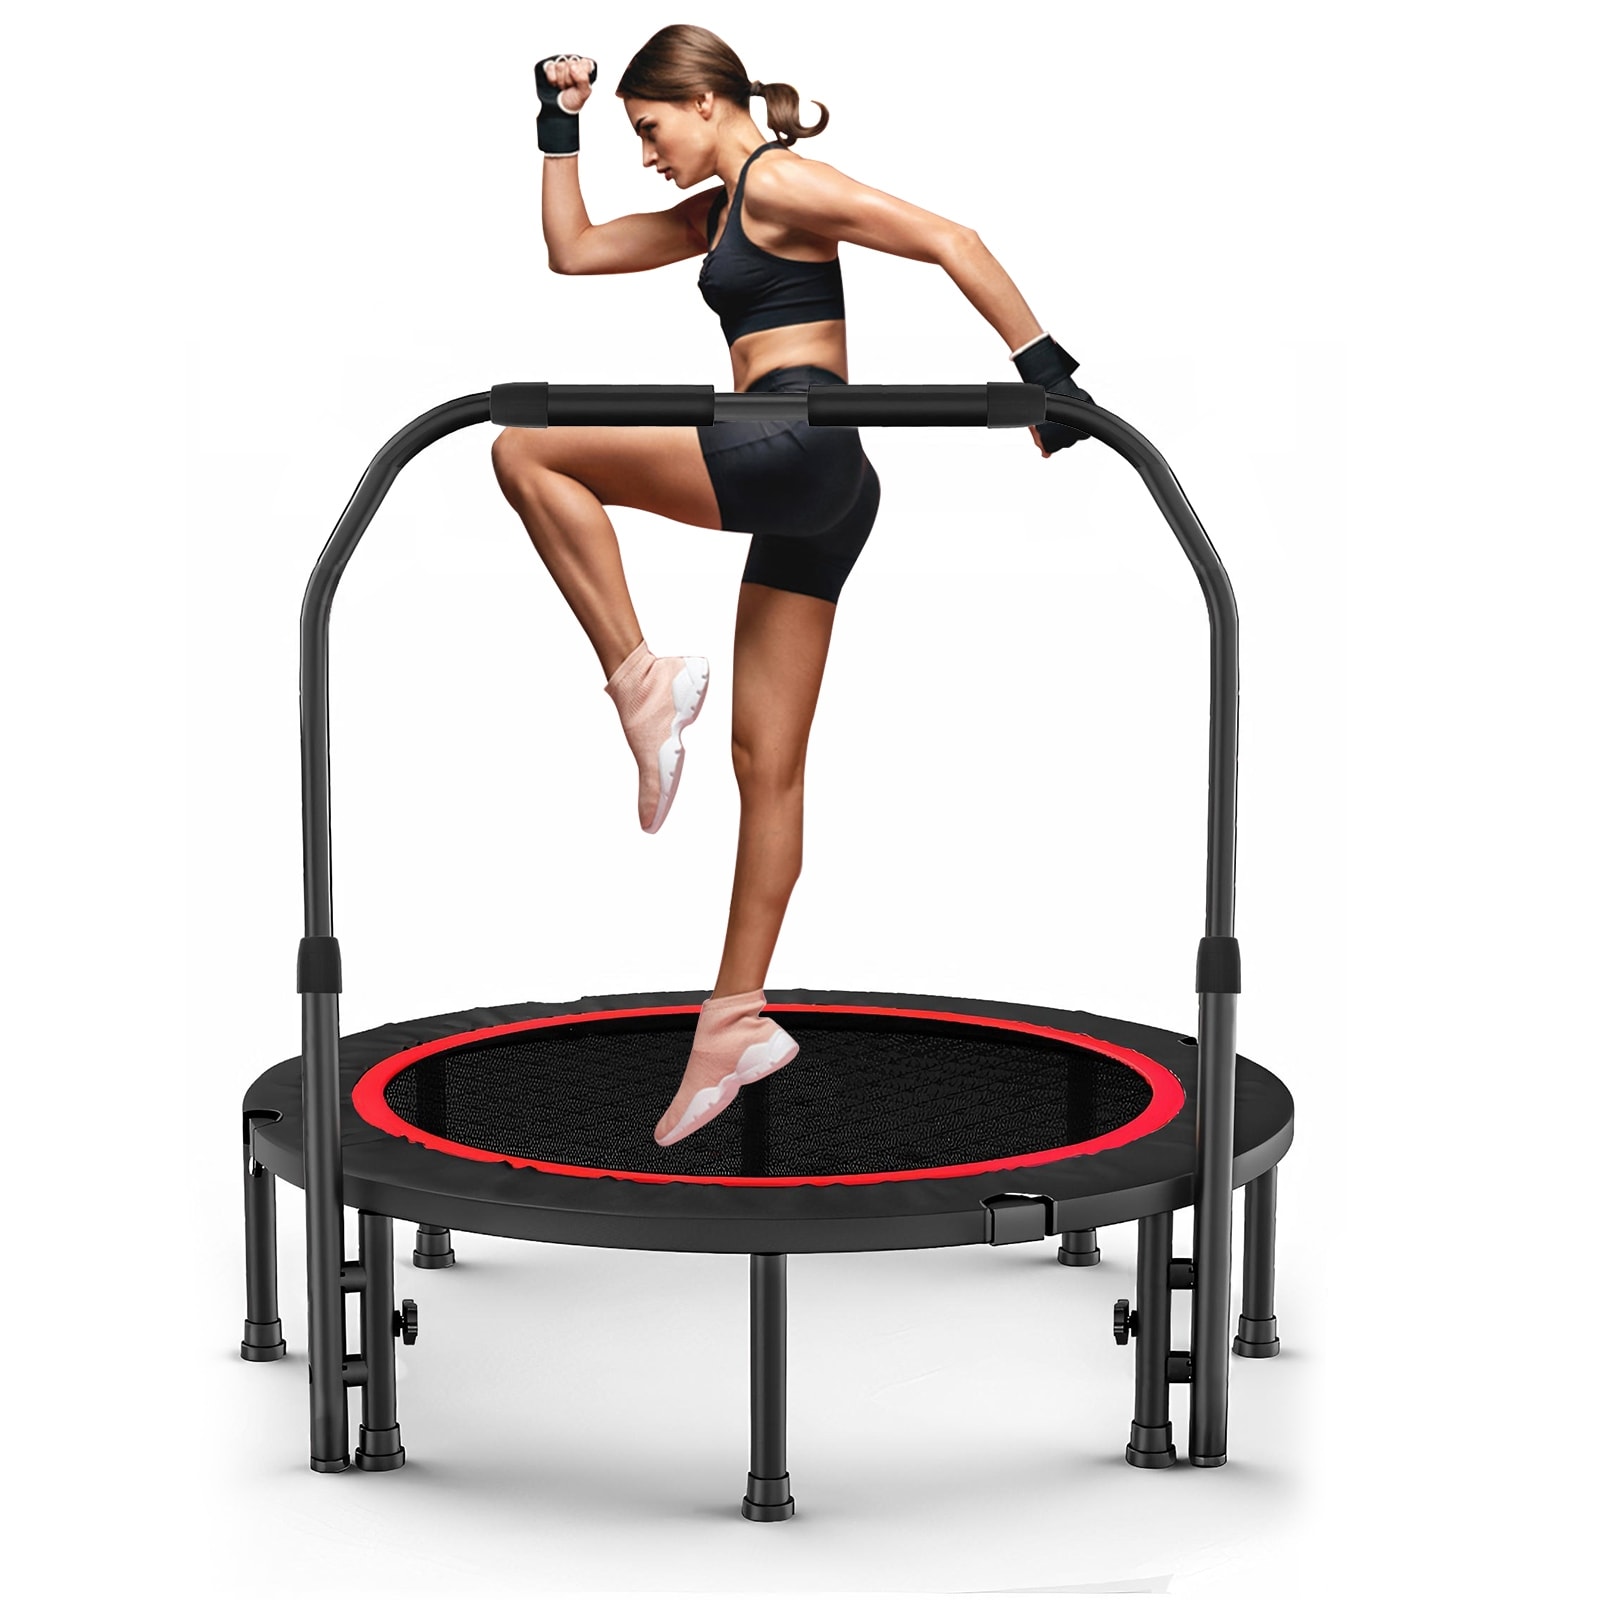 38" Foldable Trampoline Rebounder for Indoor/Outdoor Workout Max Load 330 lbs - inches - Bed Bath & Beyond - 33920136